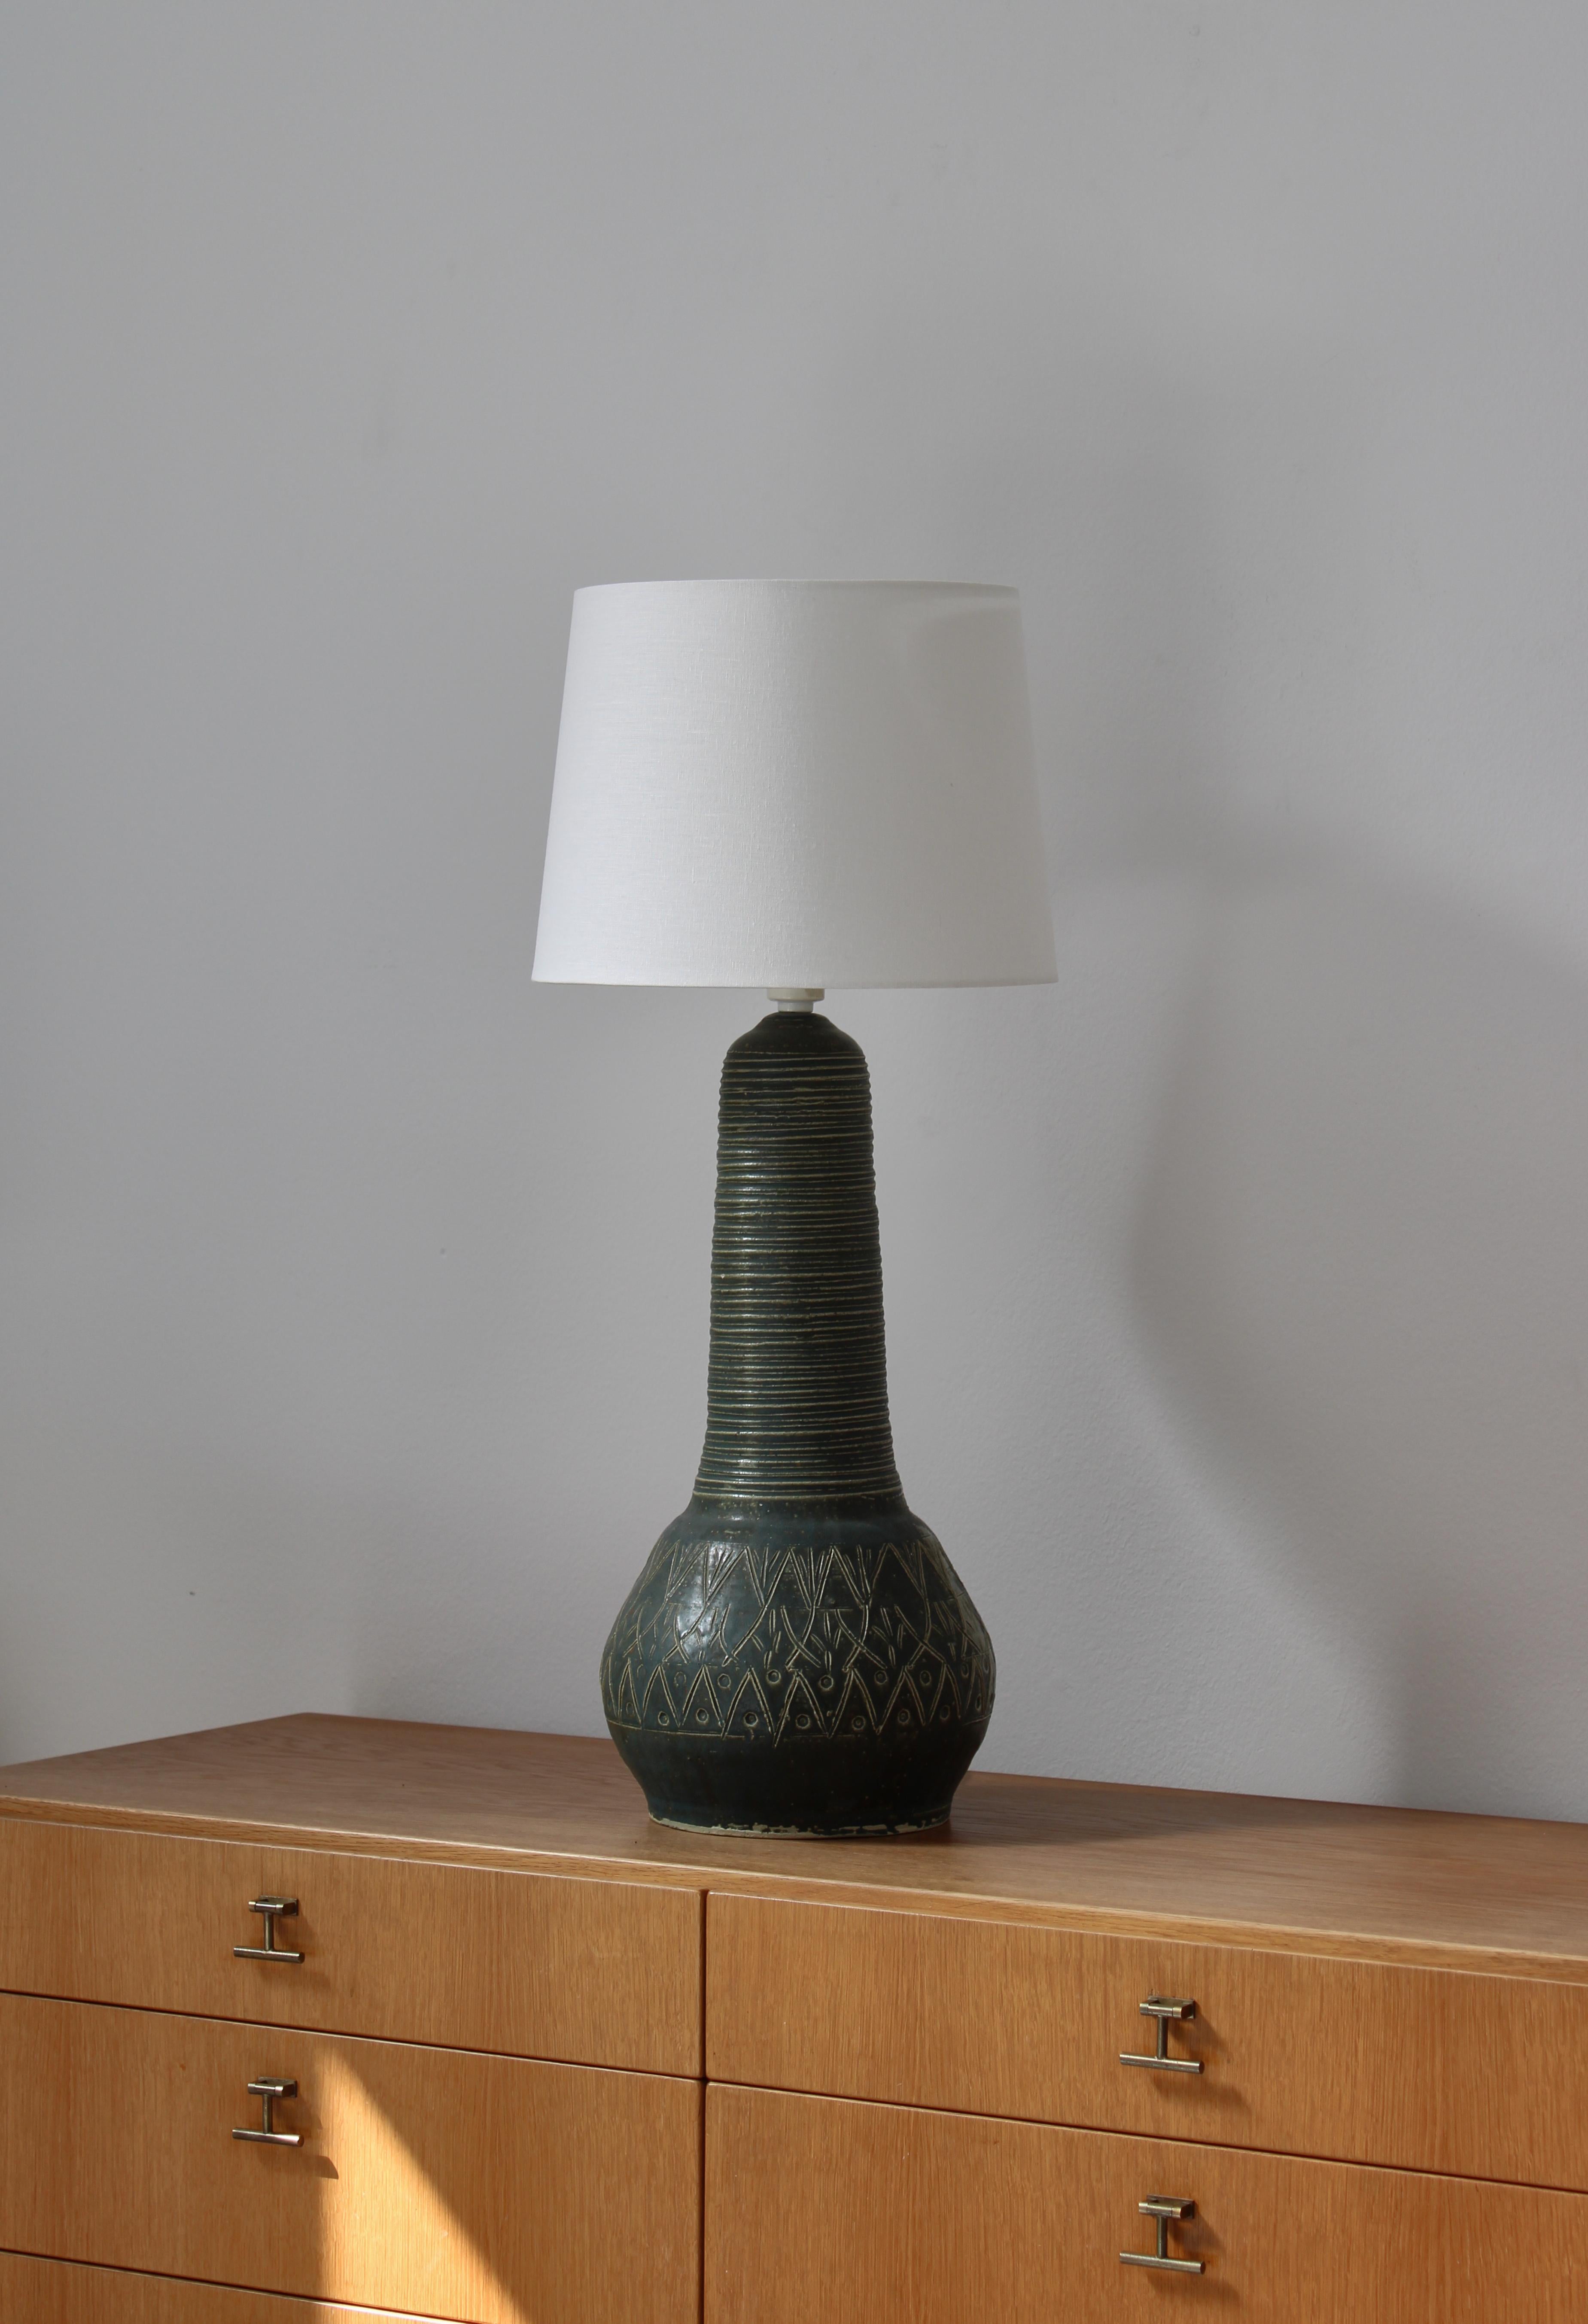 Large handmade table lamp made in the 1960s in Denmark in modern style. Beautiful green glazing and abstract organic incised decorations. Unsigned but of high quality in the style of 